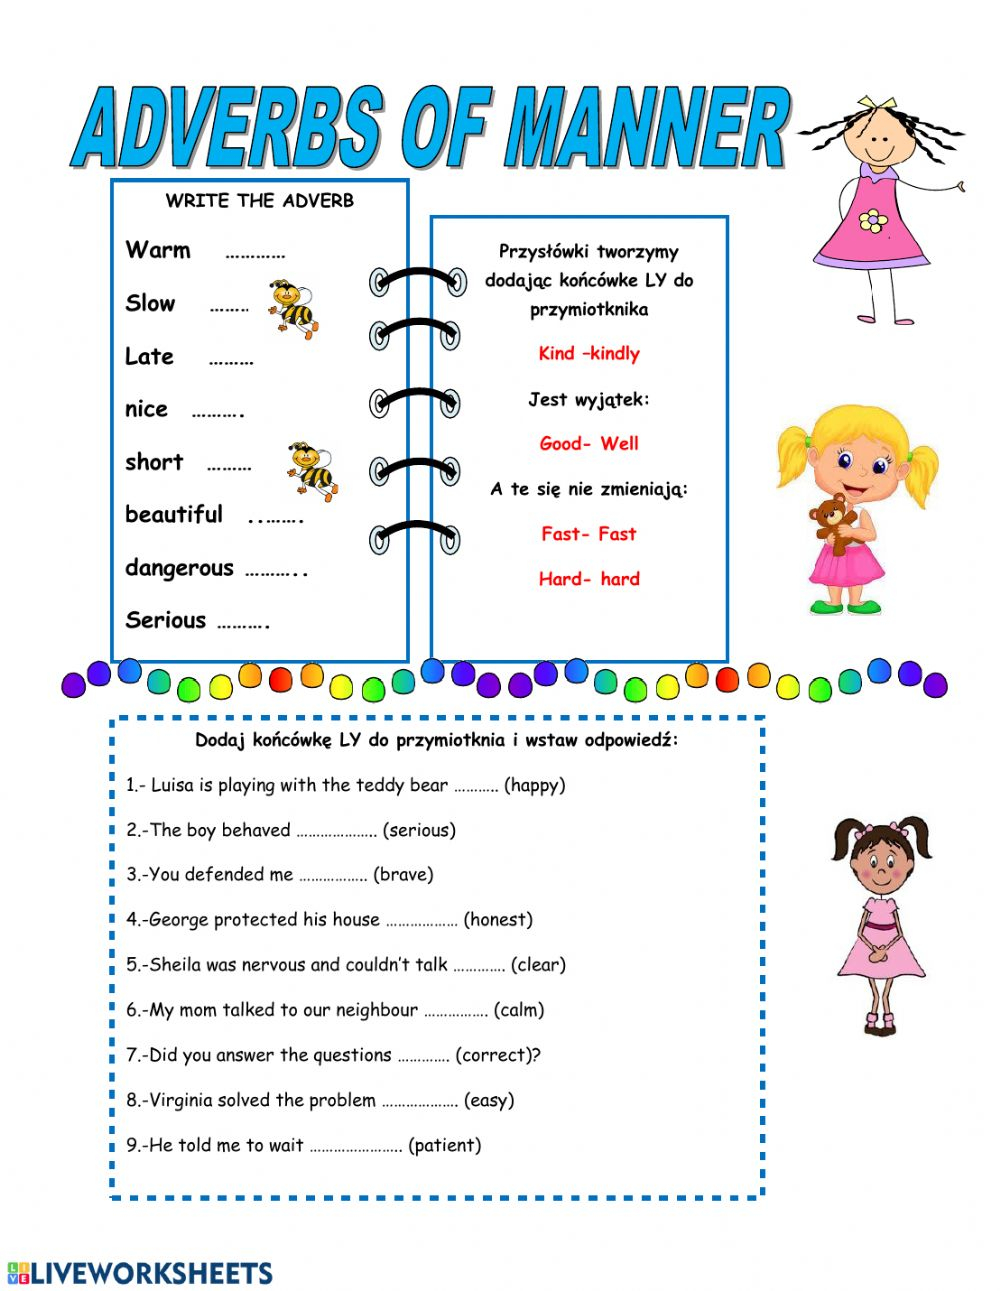 Adverb Of Manner Worksheet Grade 3 1 1 Fill The Gaps In The Table